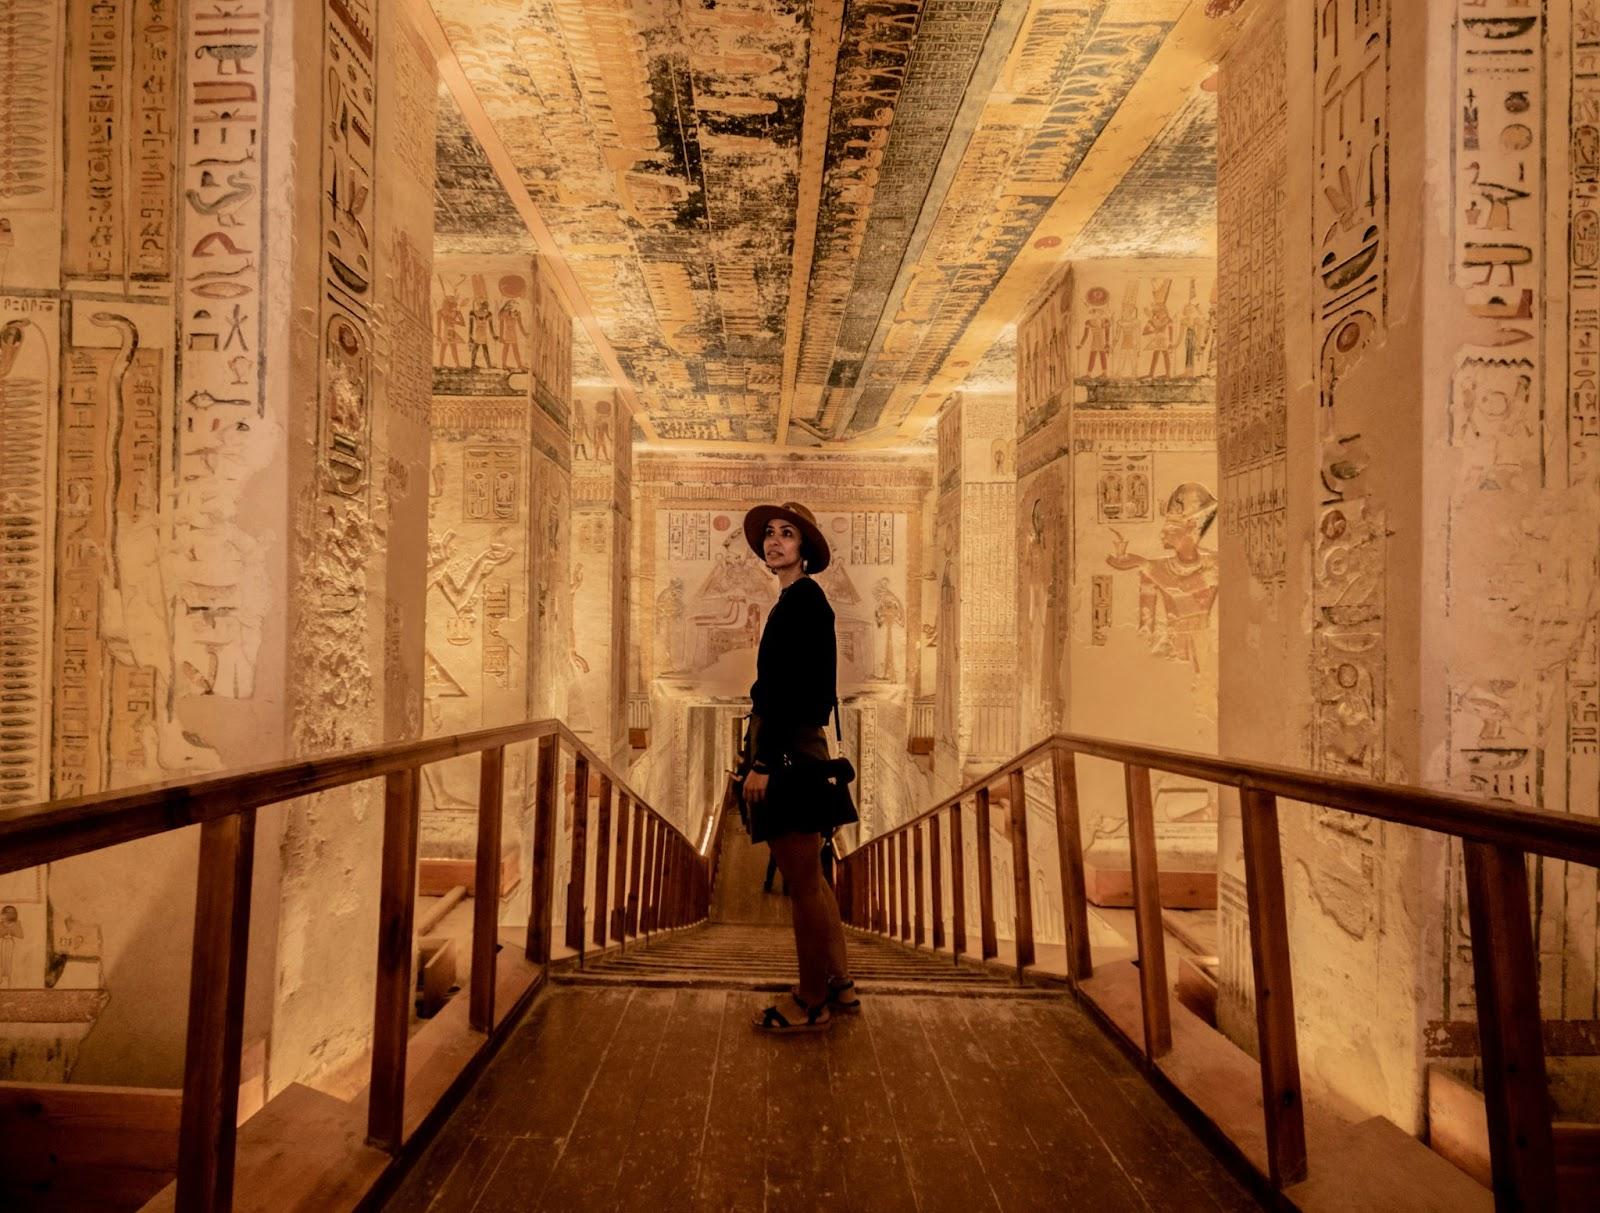 Woman stood inside one of the tombs of the pharos paid by for converting GBP to EGP before travel 